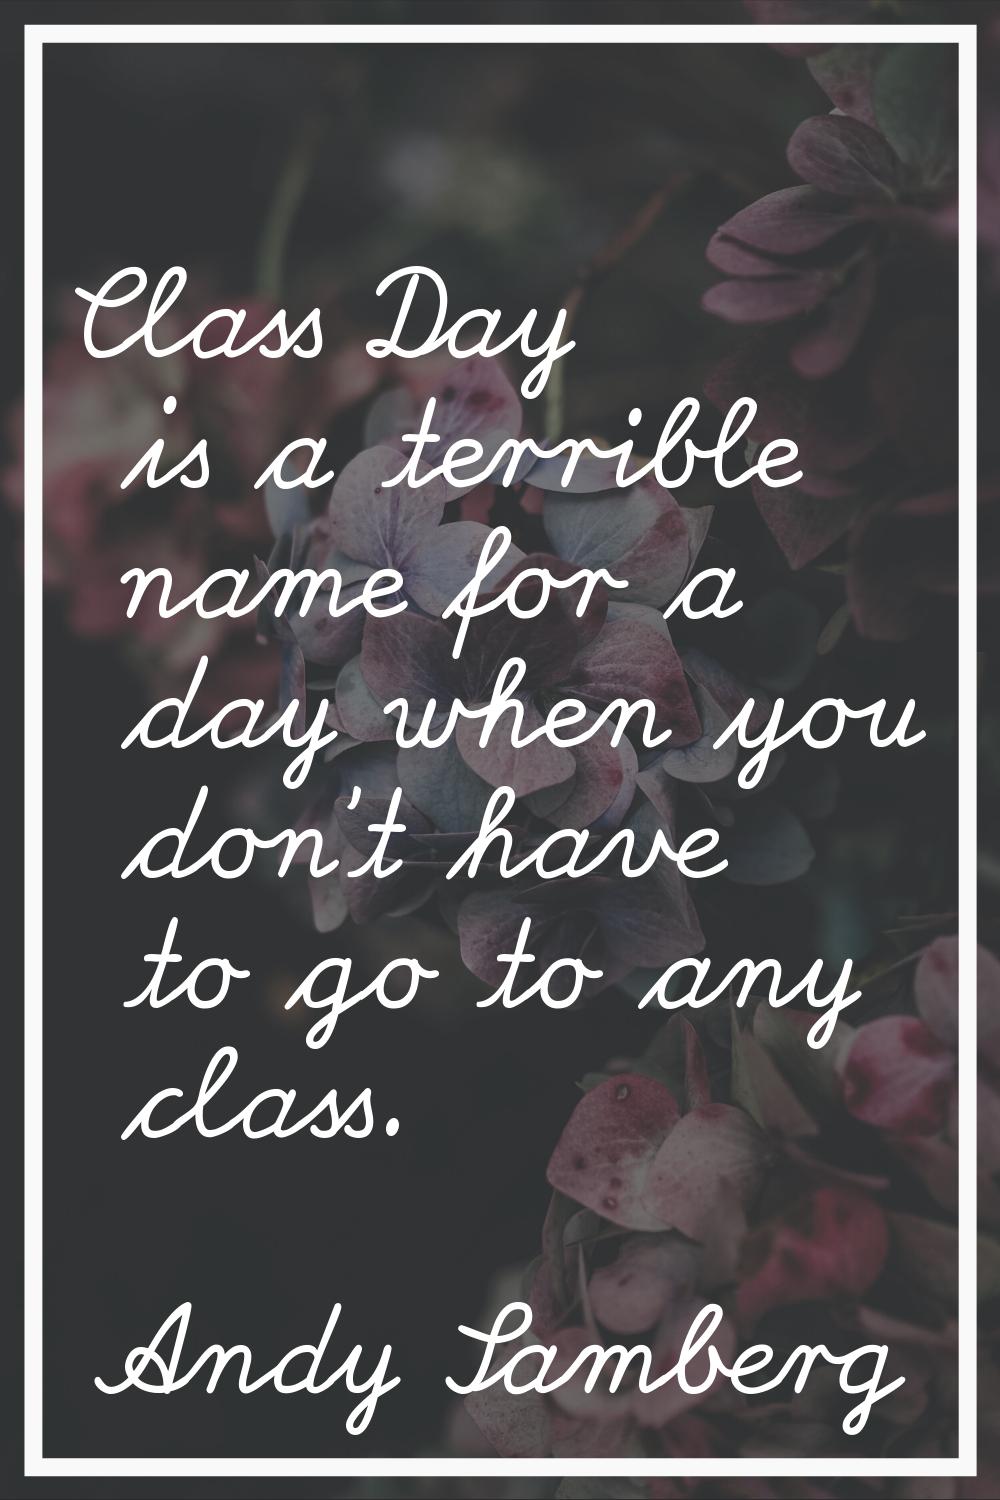 Class Day is a terrible name for a day when you don't have to go to any class.